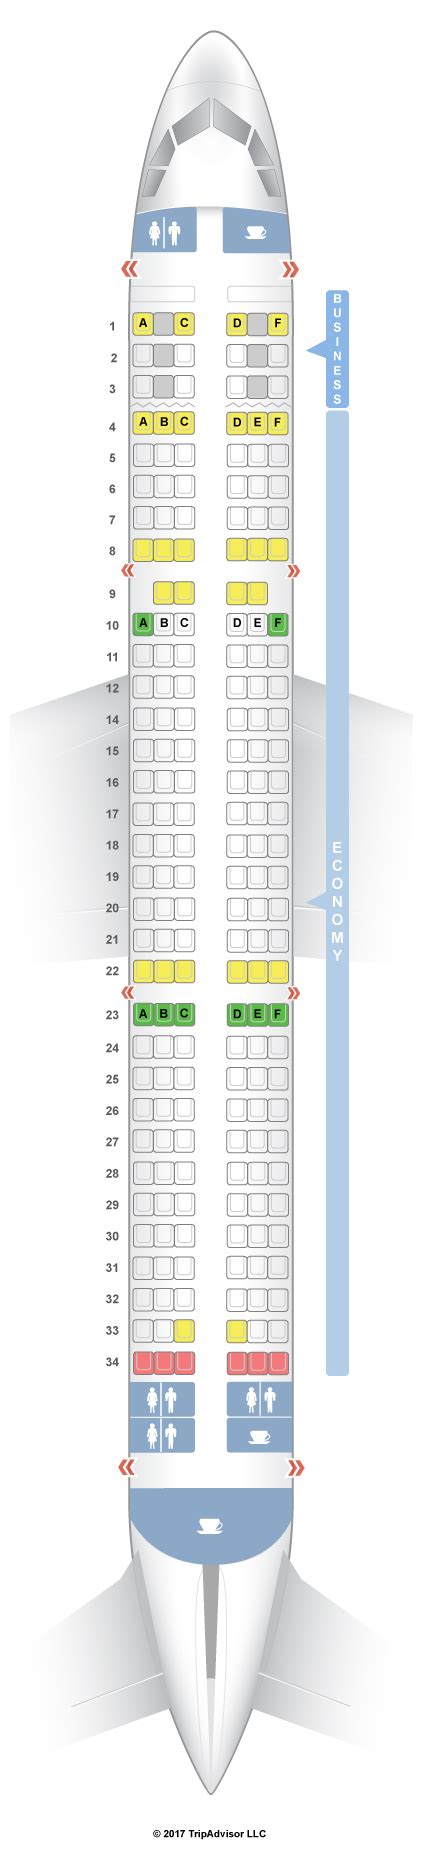 Alitalia Airbus A321 Seating Plan Images And Photos Finder